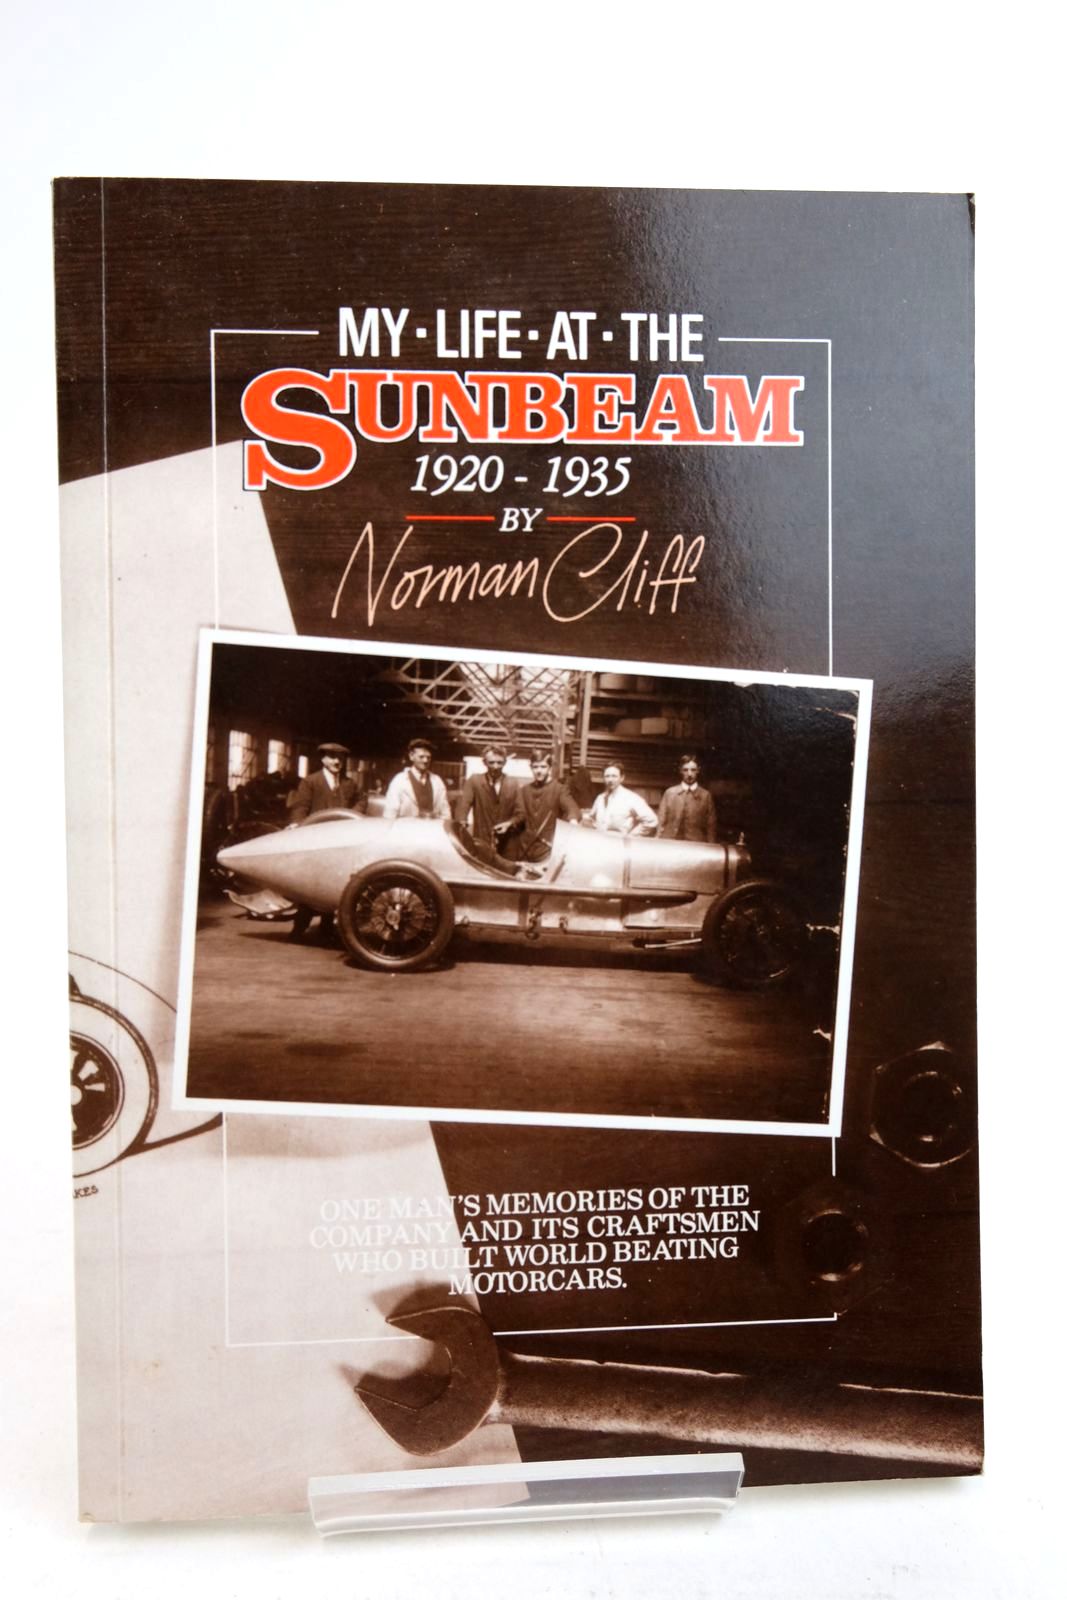 Photo of MY LIFE AT THE SUNBEAM 1920 - 1935 written by Cliff, Norman published by Ashley James Limited (STOCK CODE: 2134596)  for sale by Stella & Rose's Books